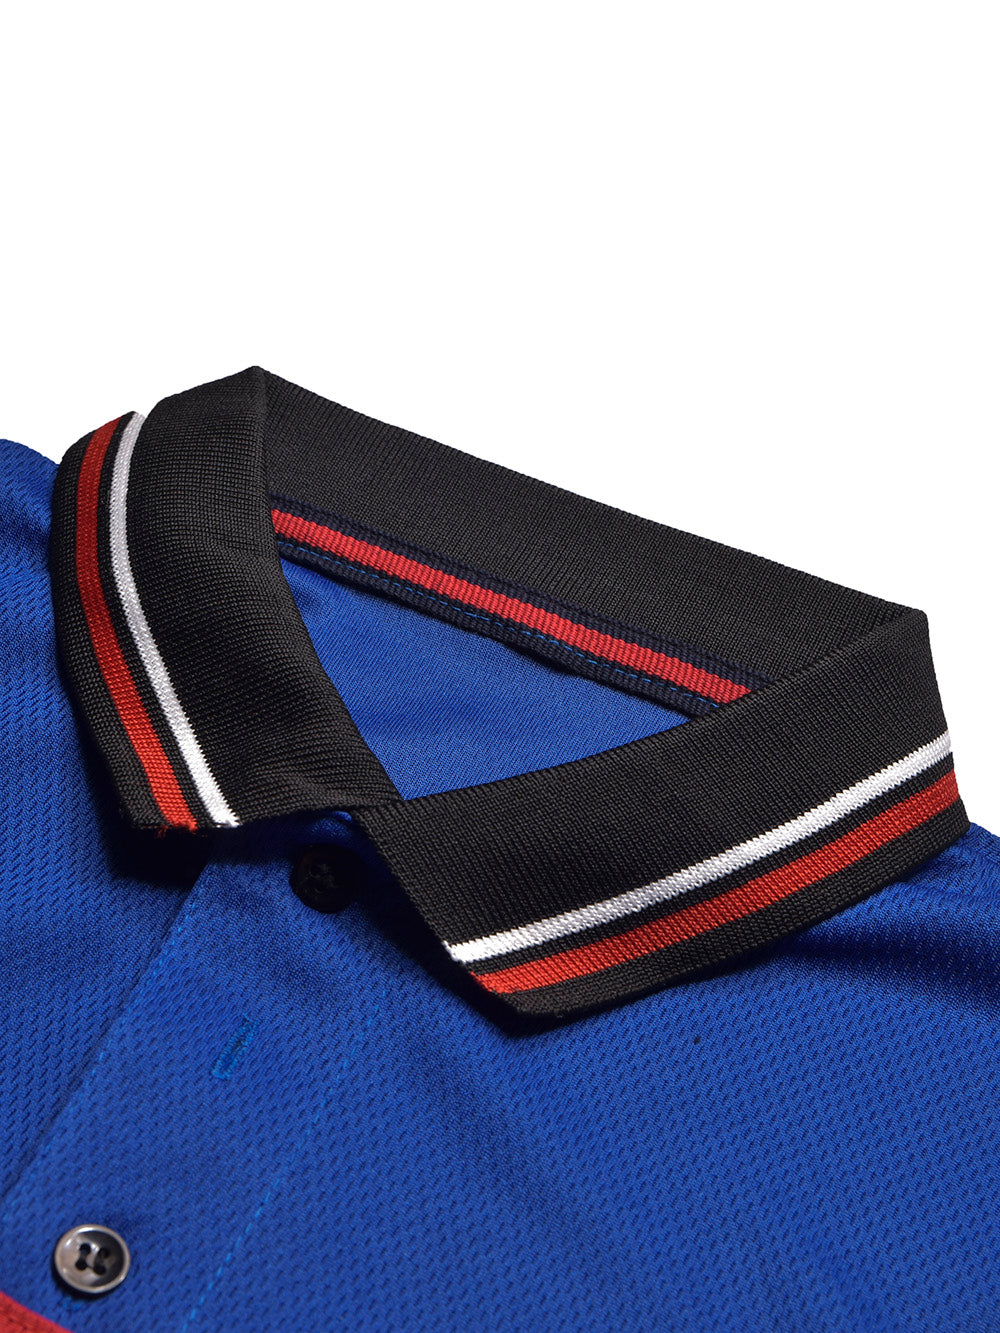 LV Summer Active Wear Polo Shirt For Men-Black with Red & Blue Panels-BE1344/BR13586